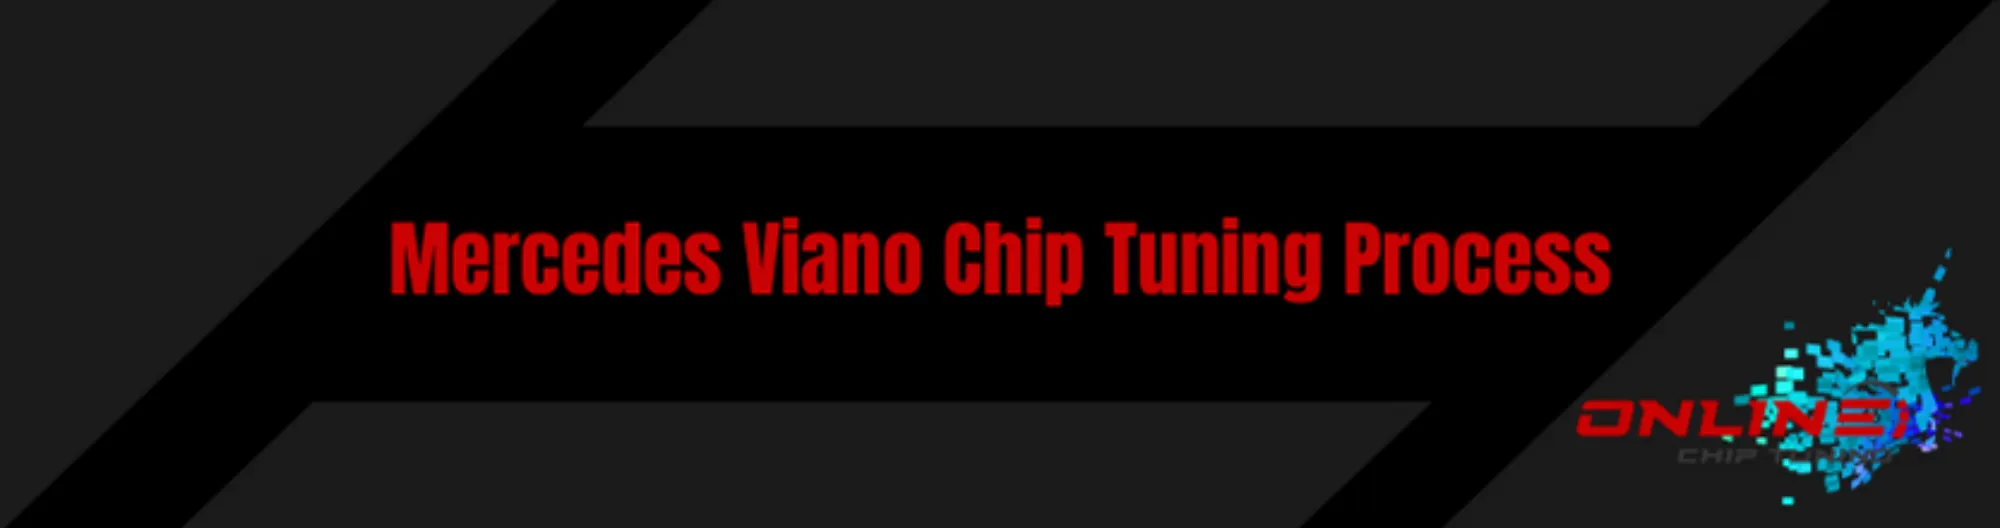 Mercedes Viano Chip Tuning Process